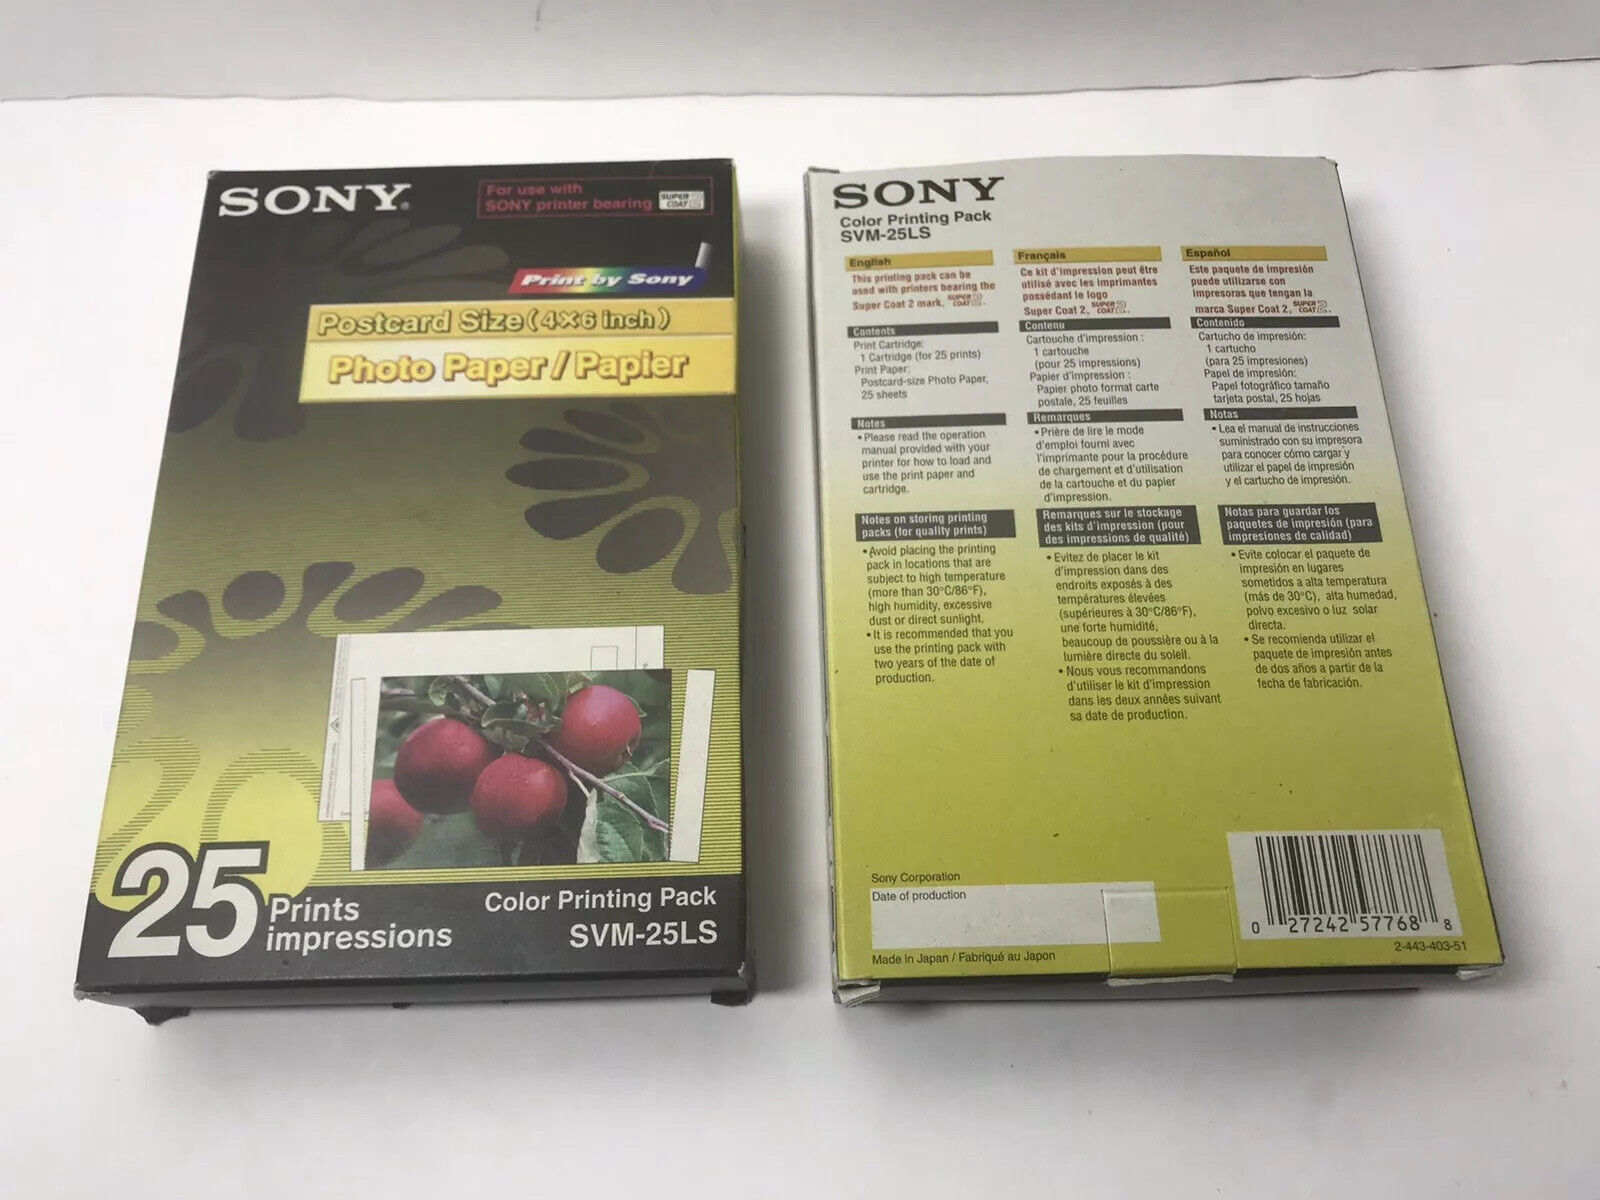  2 New Sony SVM-25LS Color Printing Pk 4 x 6 Postcard Size Photo Paper